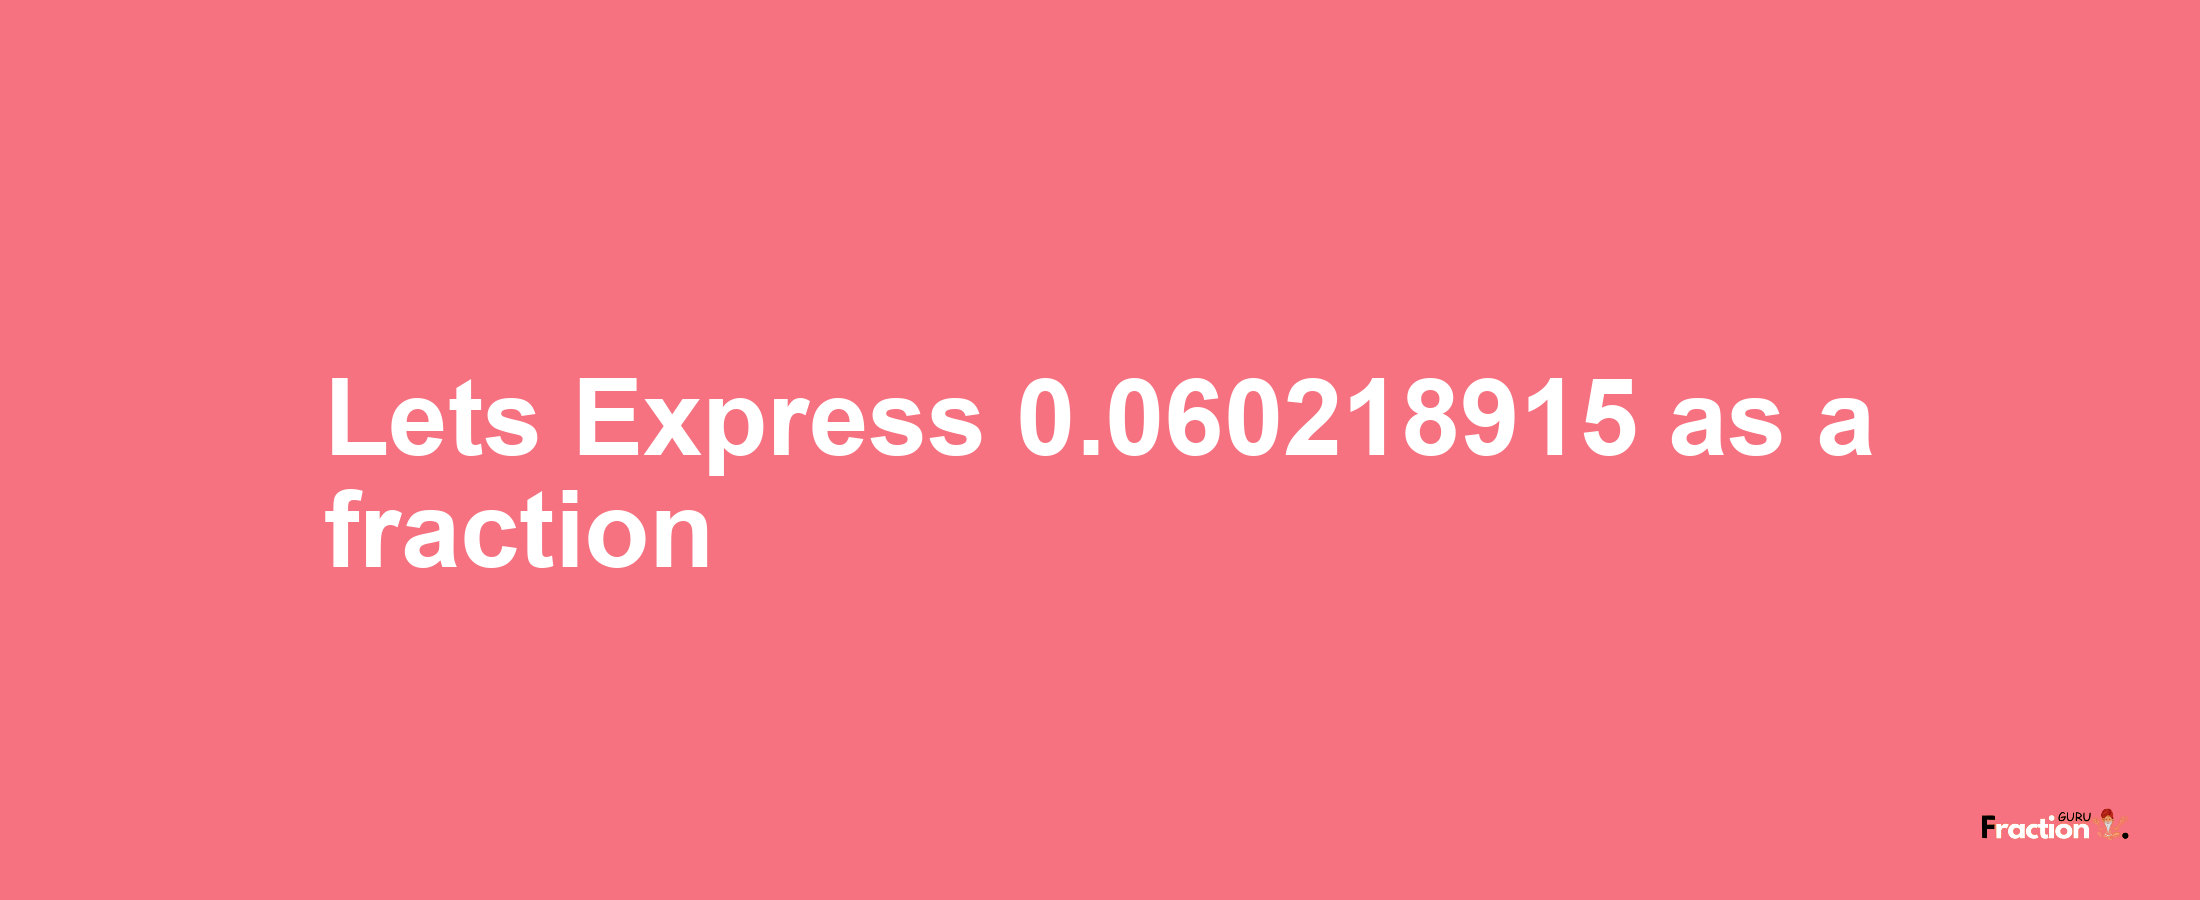 Lets Express 0.060218915 as afraction